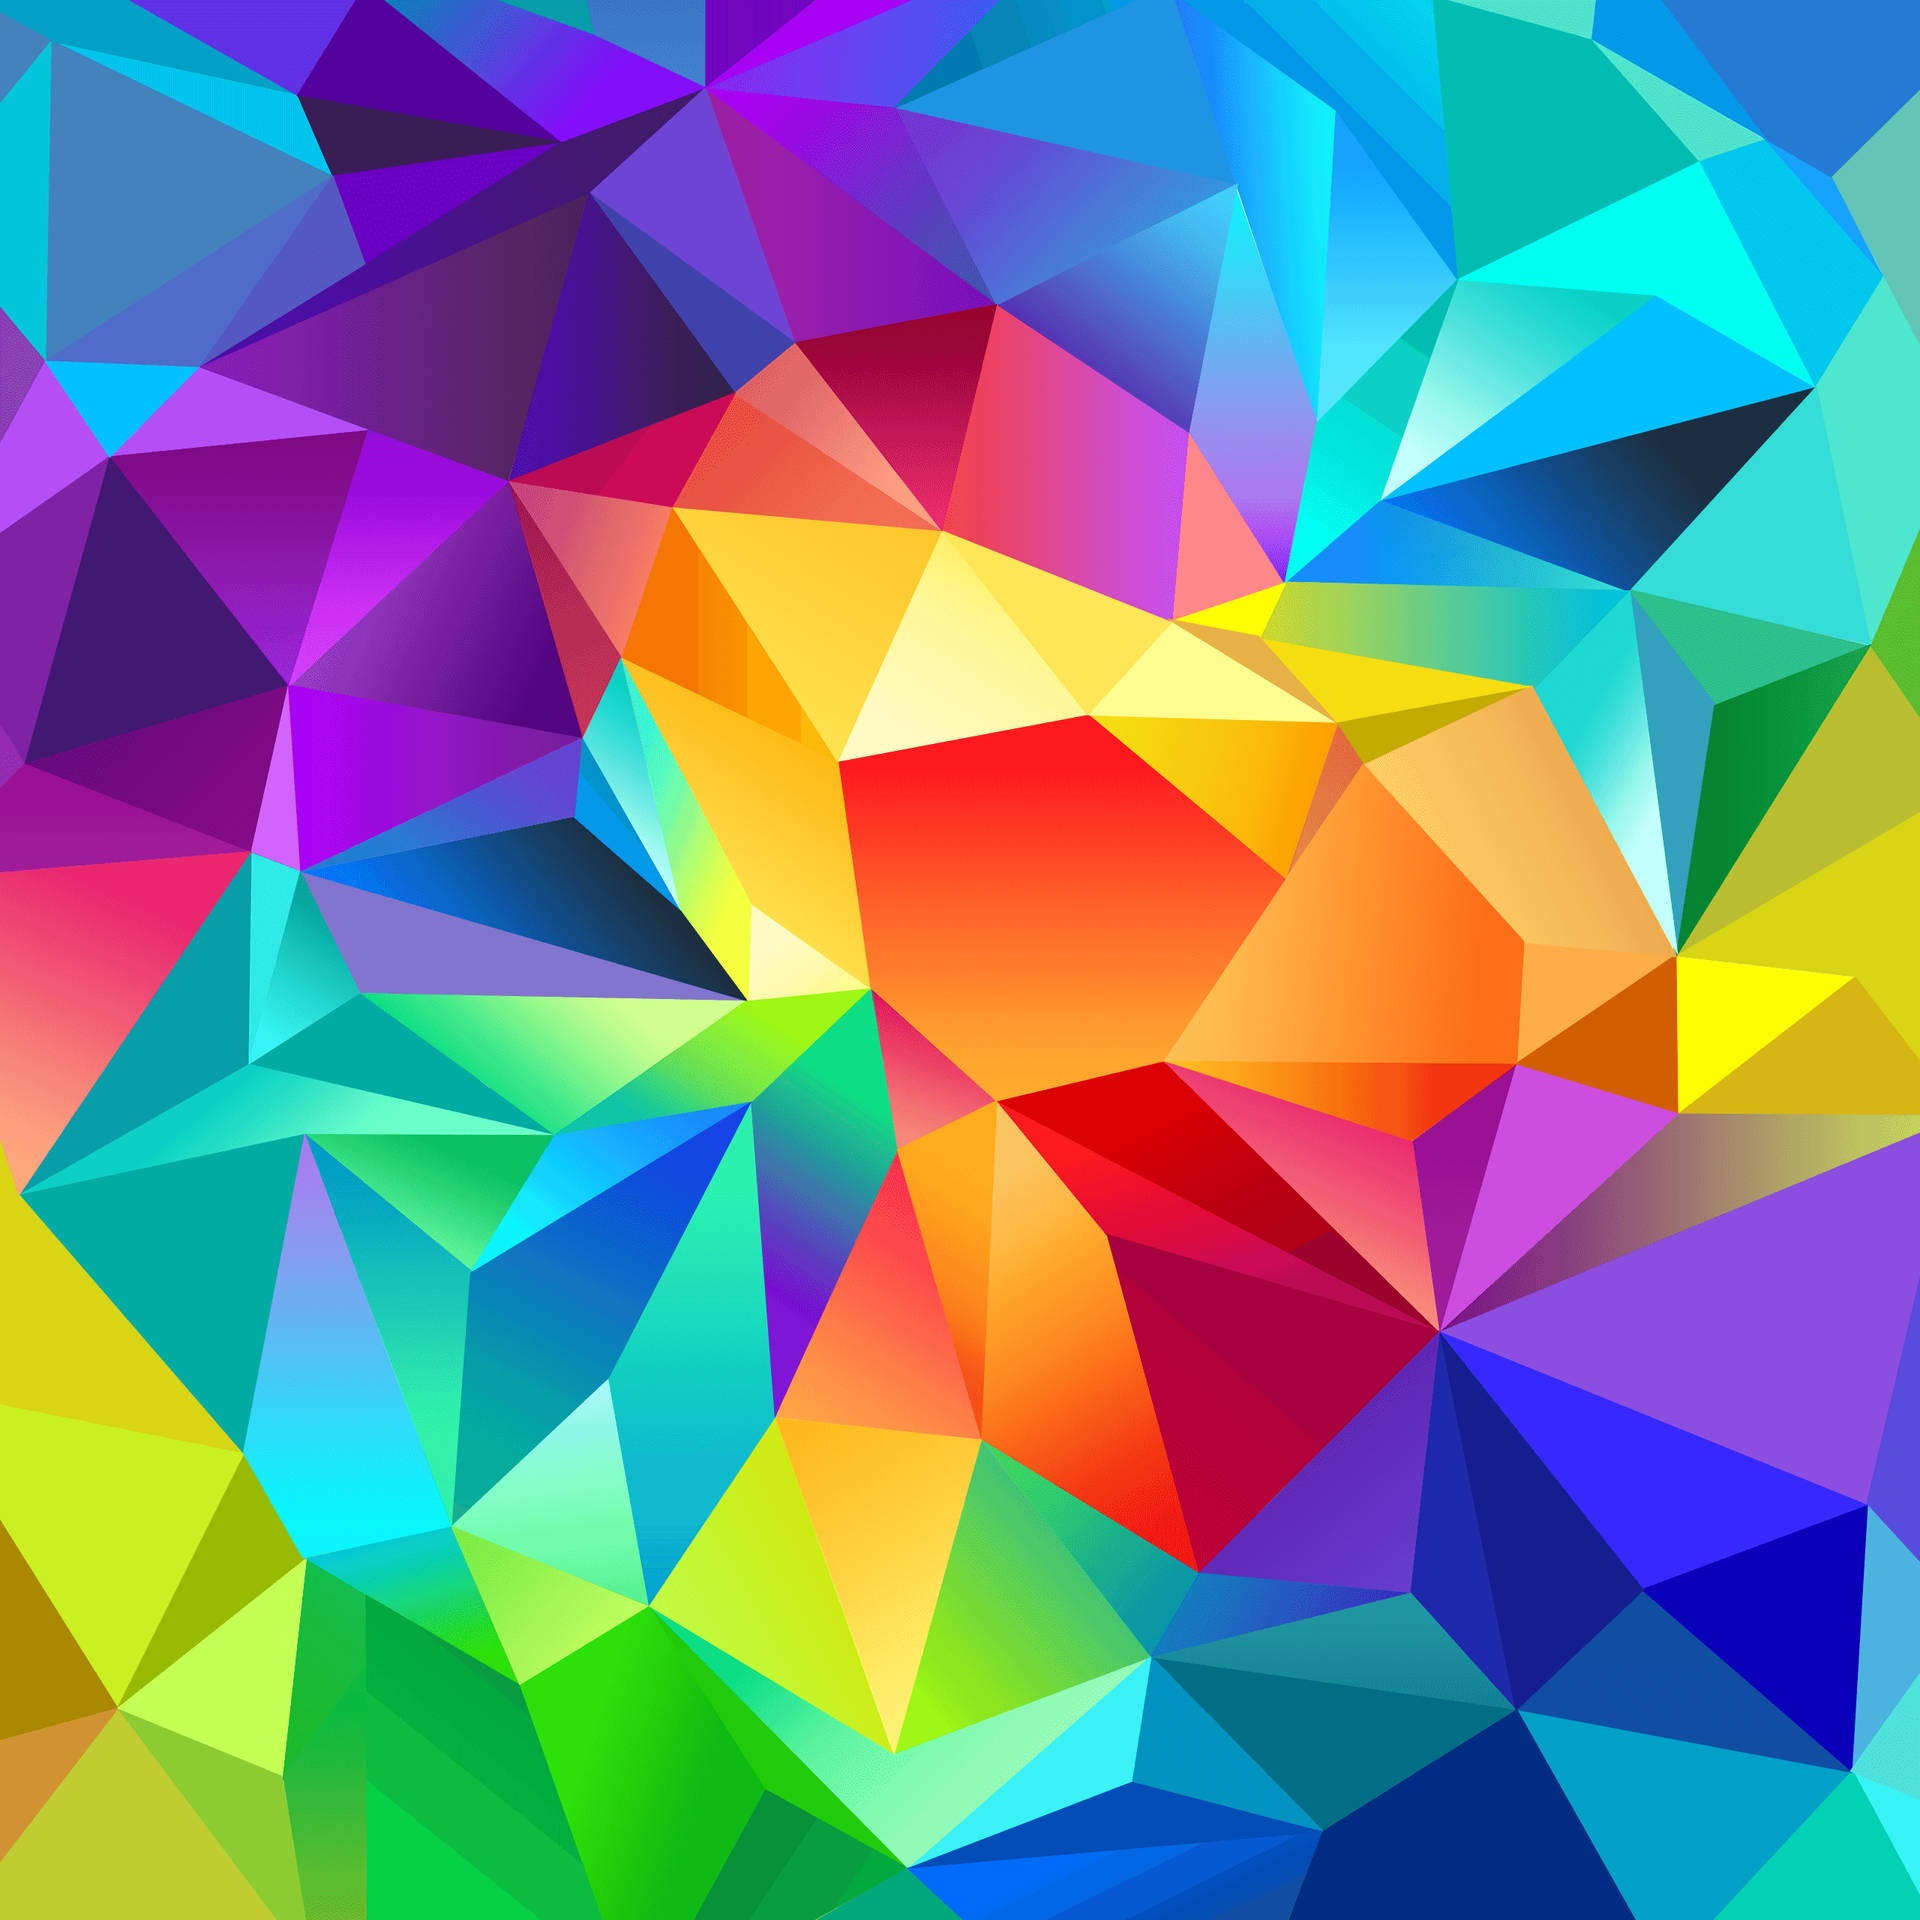 Colourful Polygonal Mosaic Samsung Galaxy Tablet Picture